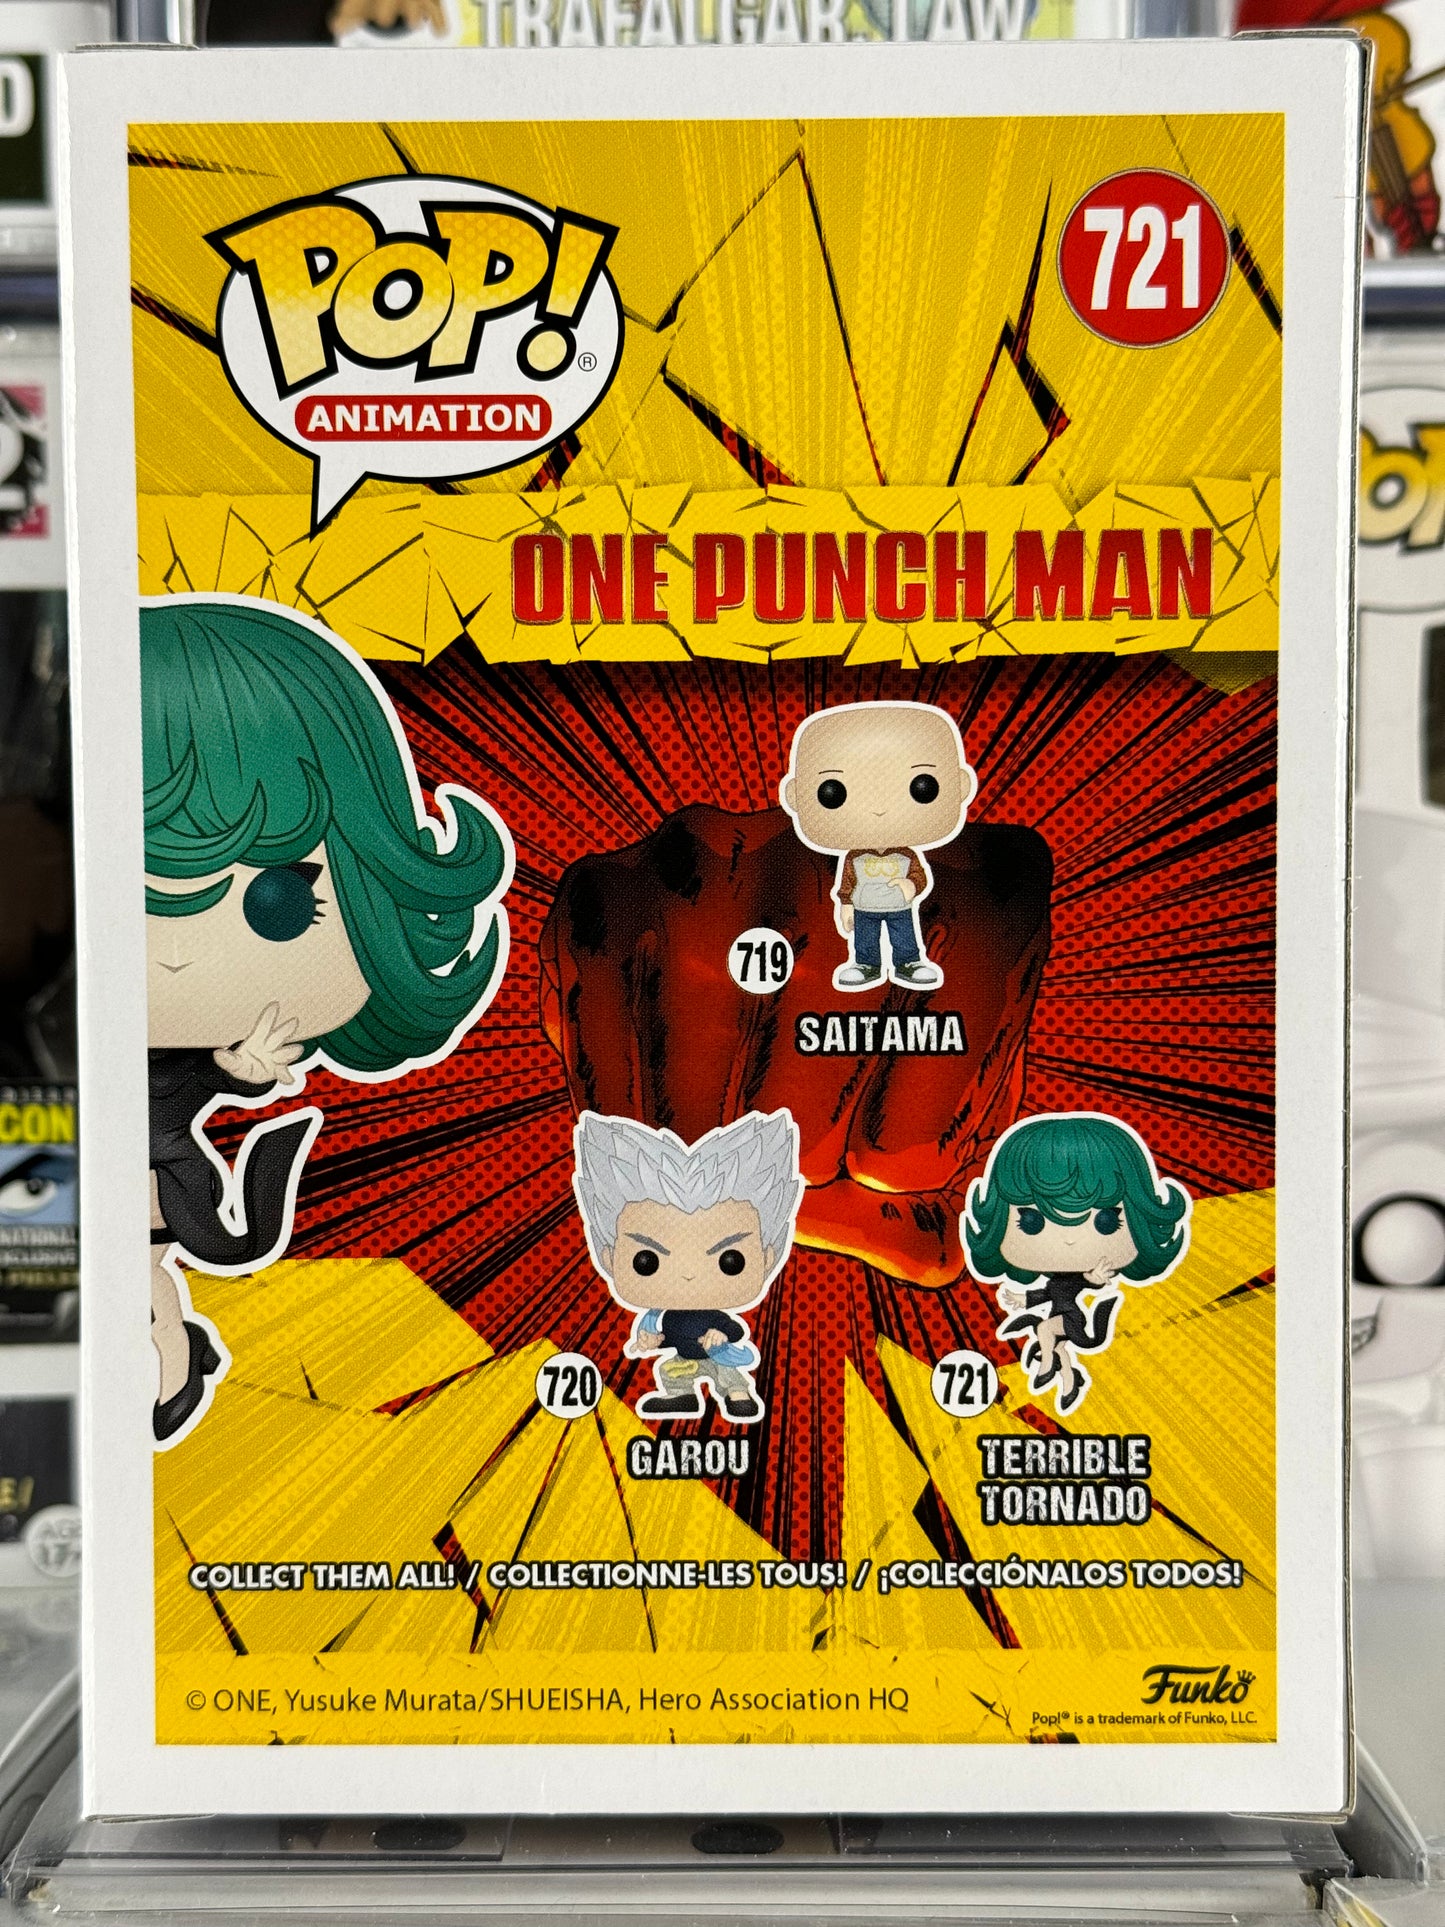 One Punch Man - Terrible Tornado (721) GLOWING CHASE